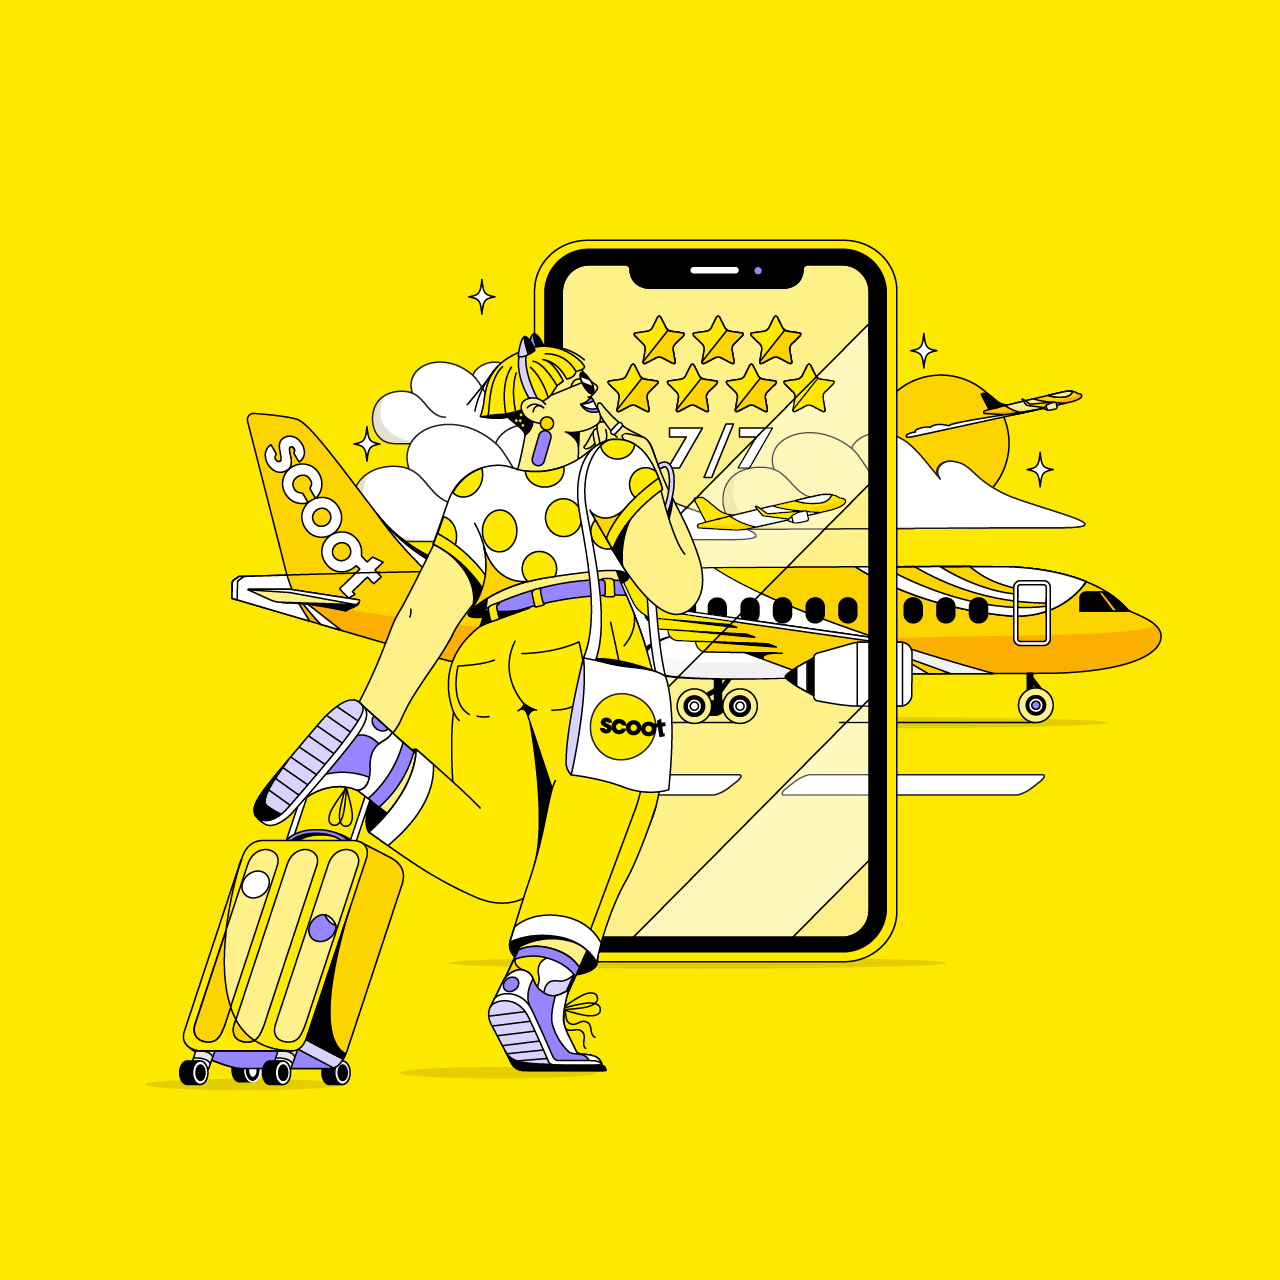 Artifact from the Scoot Airlines Illustration Showcase article on Abduzeedo